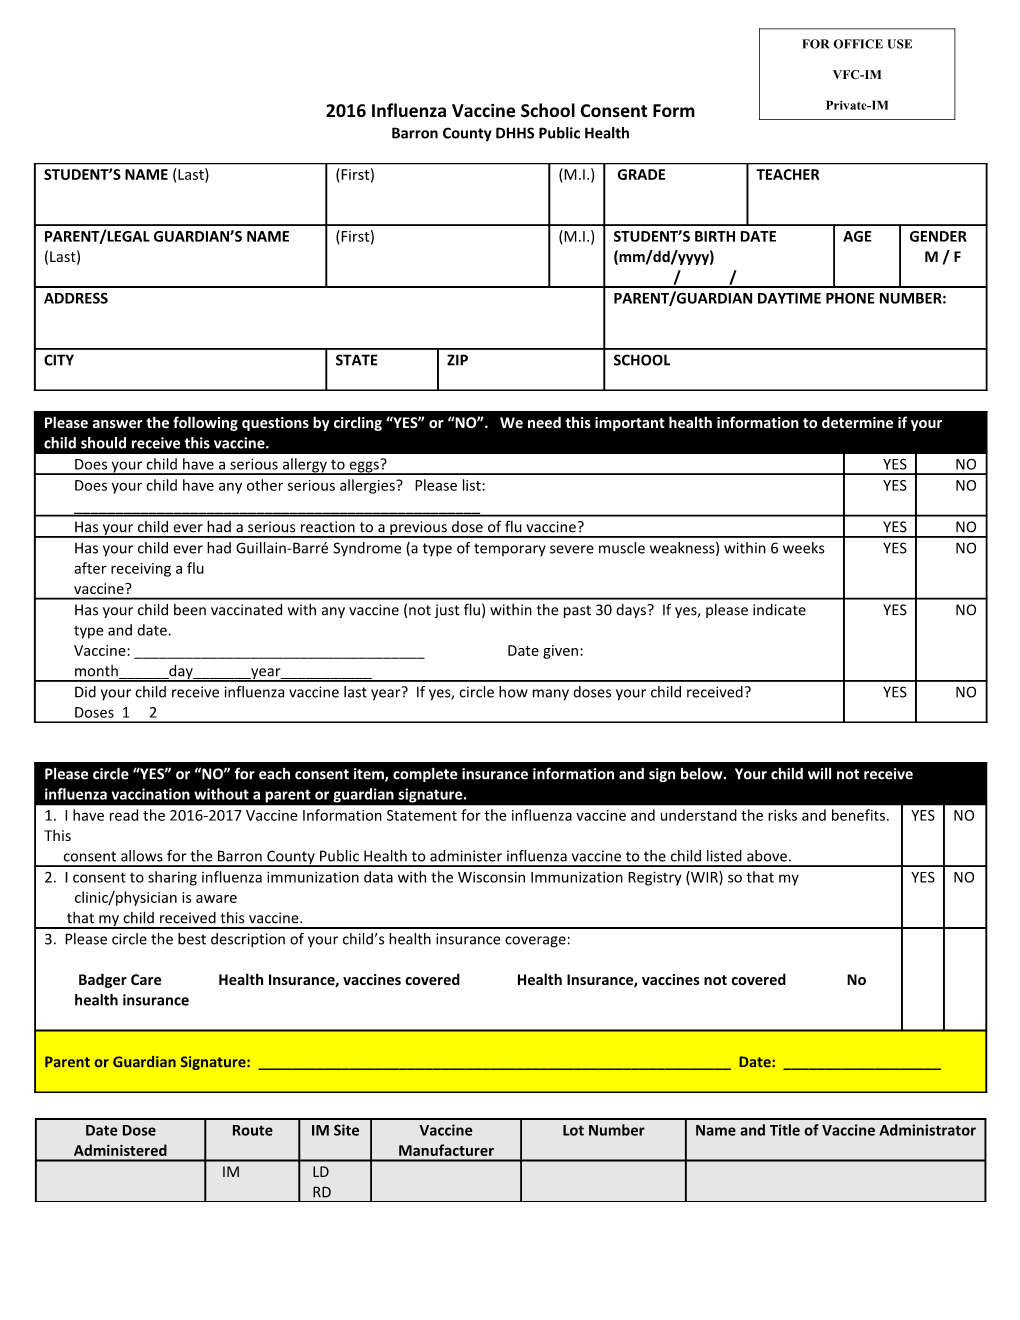 2009 H1N1 Influenza Vaccine Consent Form for Use with Either Intramuscular, Injectable